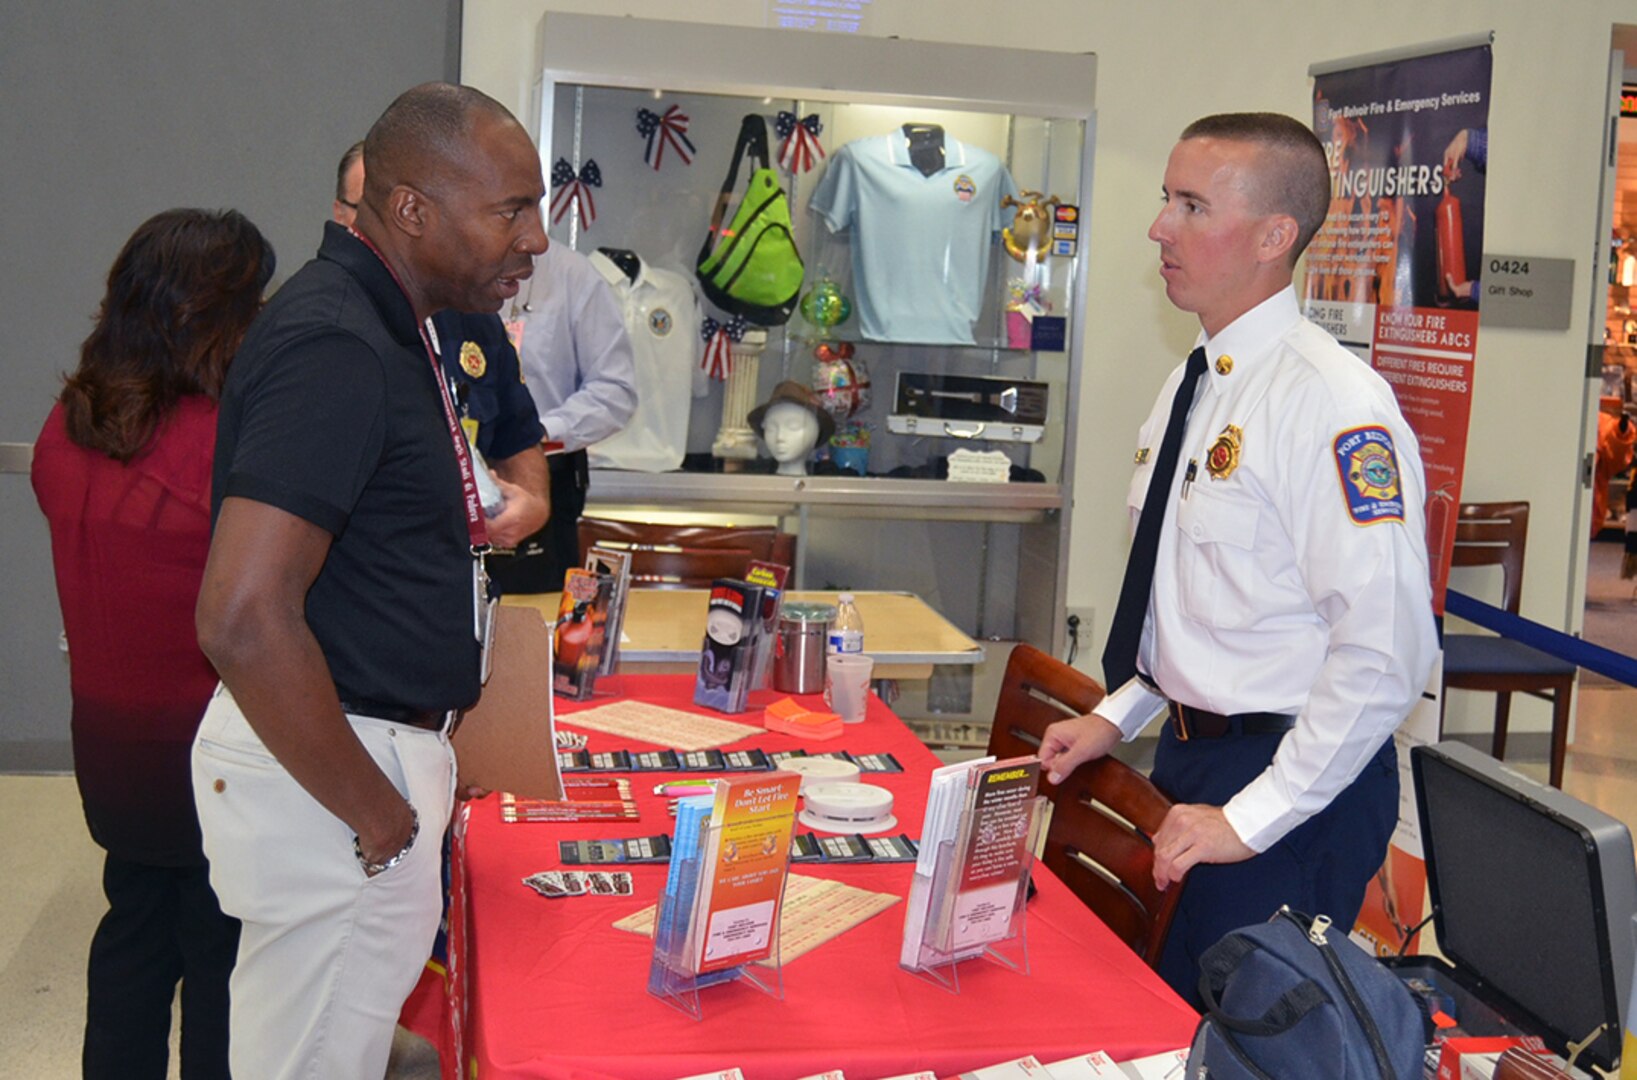 A McNamara Headquarters Complex employee talks with a member of the Fort Belvoir Fire Department Sept. 16 at the Preparedness and Security Expo. The expo featured various vendors, demonstrations and information to help employees better prepare for emergencies.